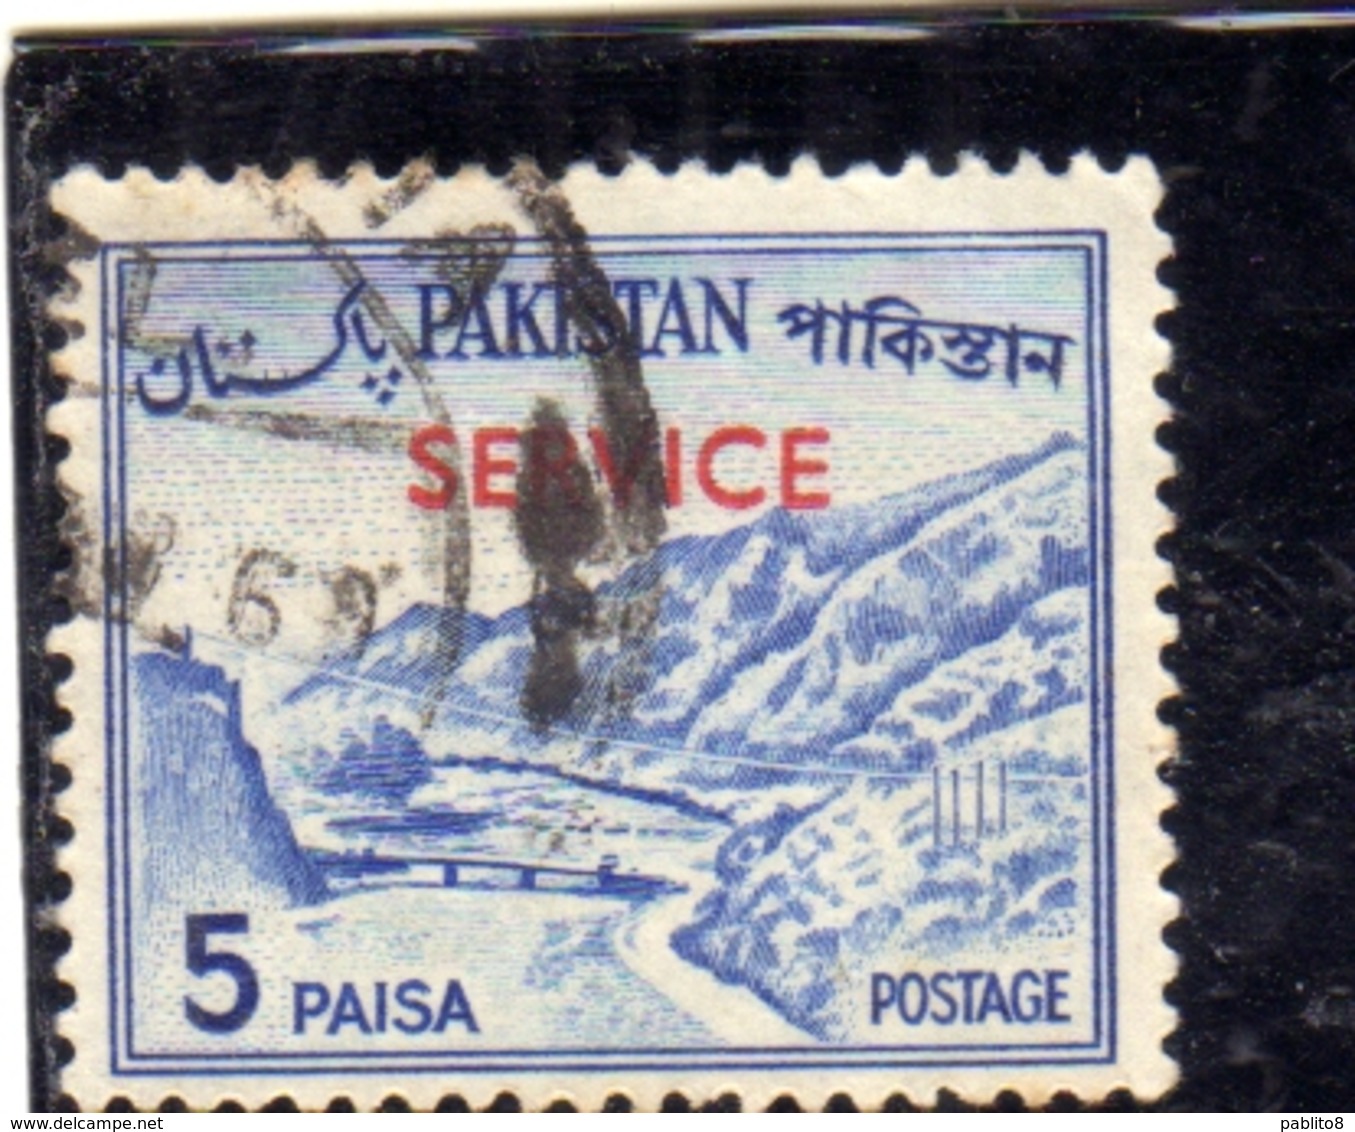 PAKISTAN 1961 1978 OFFICIAL STAMPS LANDSCAPE KHYBER PASS SERVICE OVERPRINTED 5p USED USATO OBLITERE - Pakistan